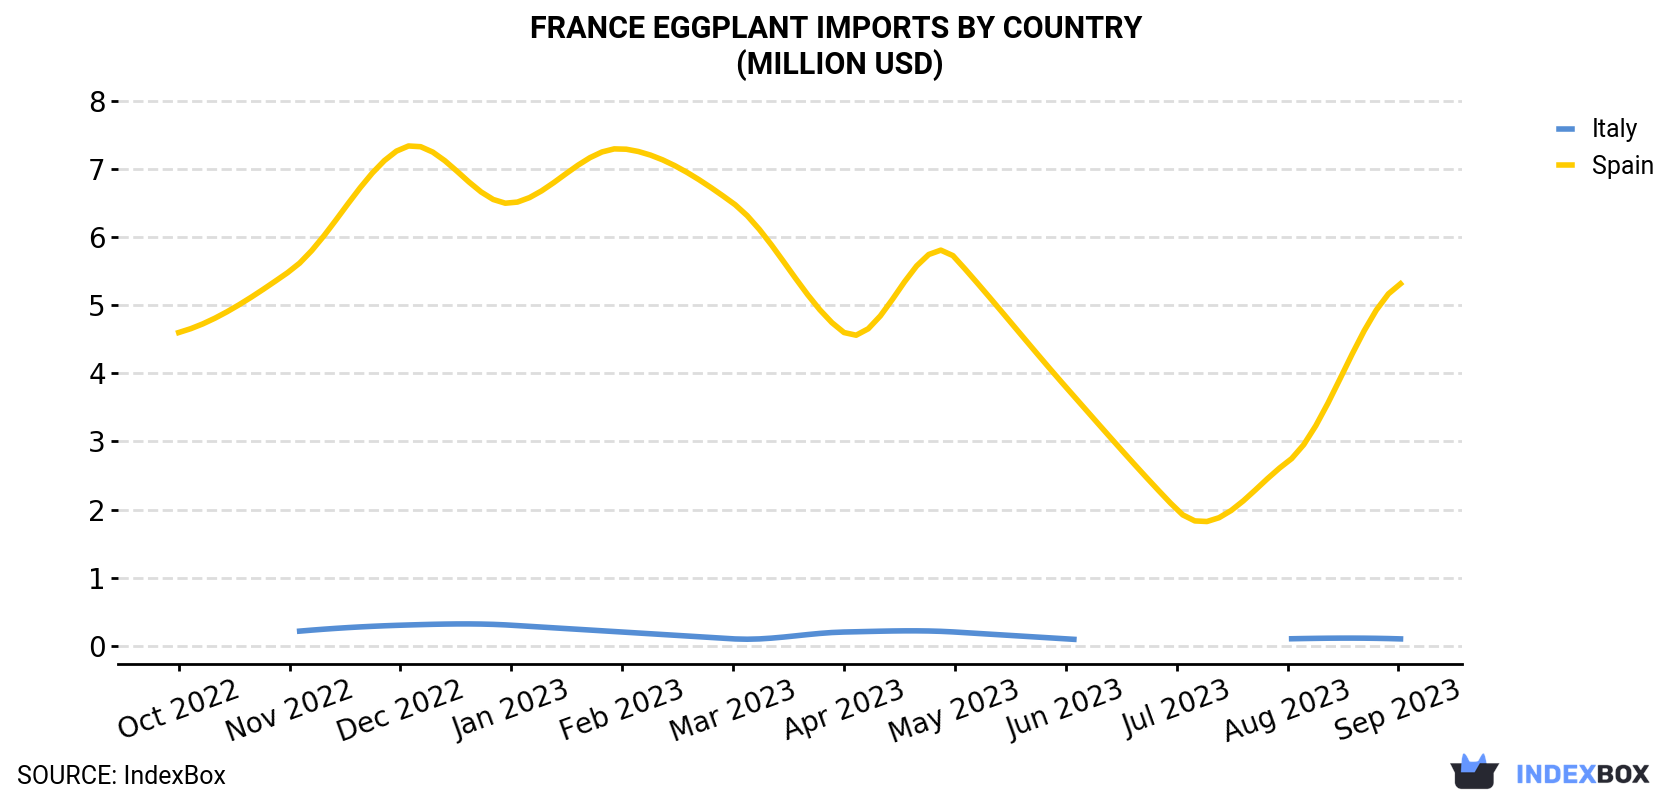 France Eggplant Imports By Country (Million USD)